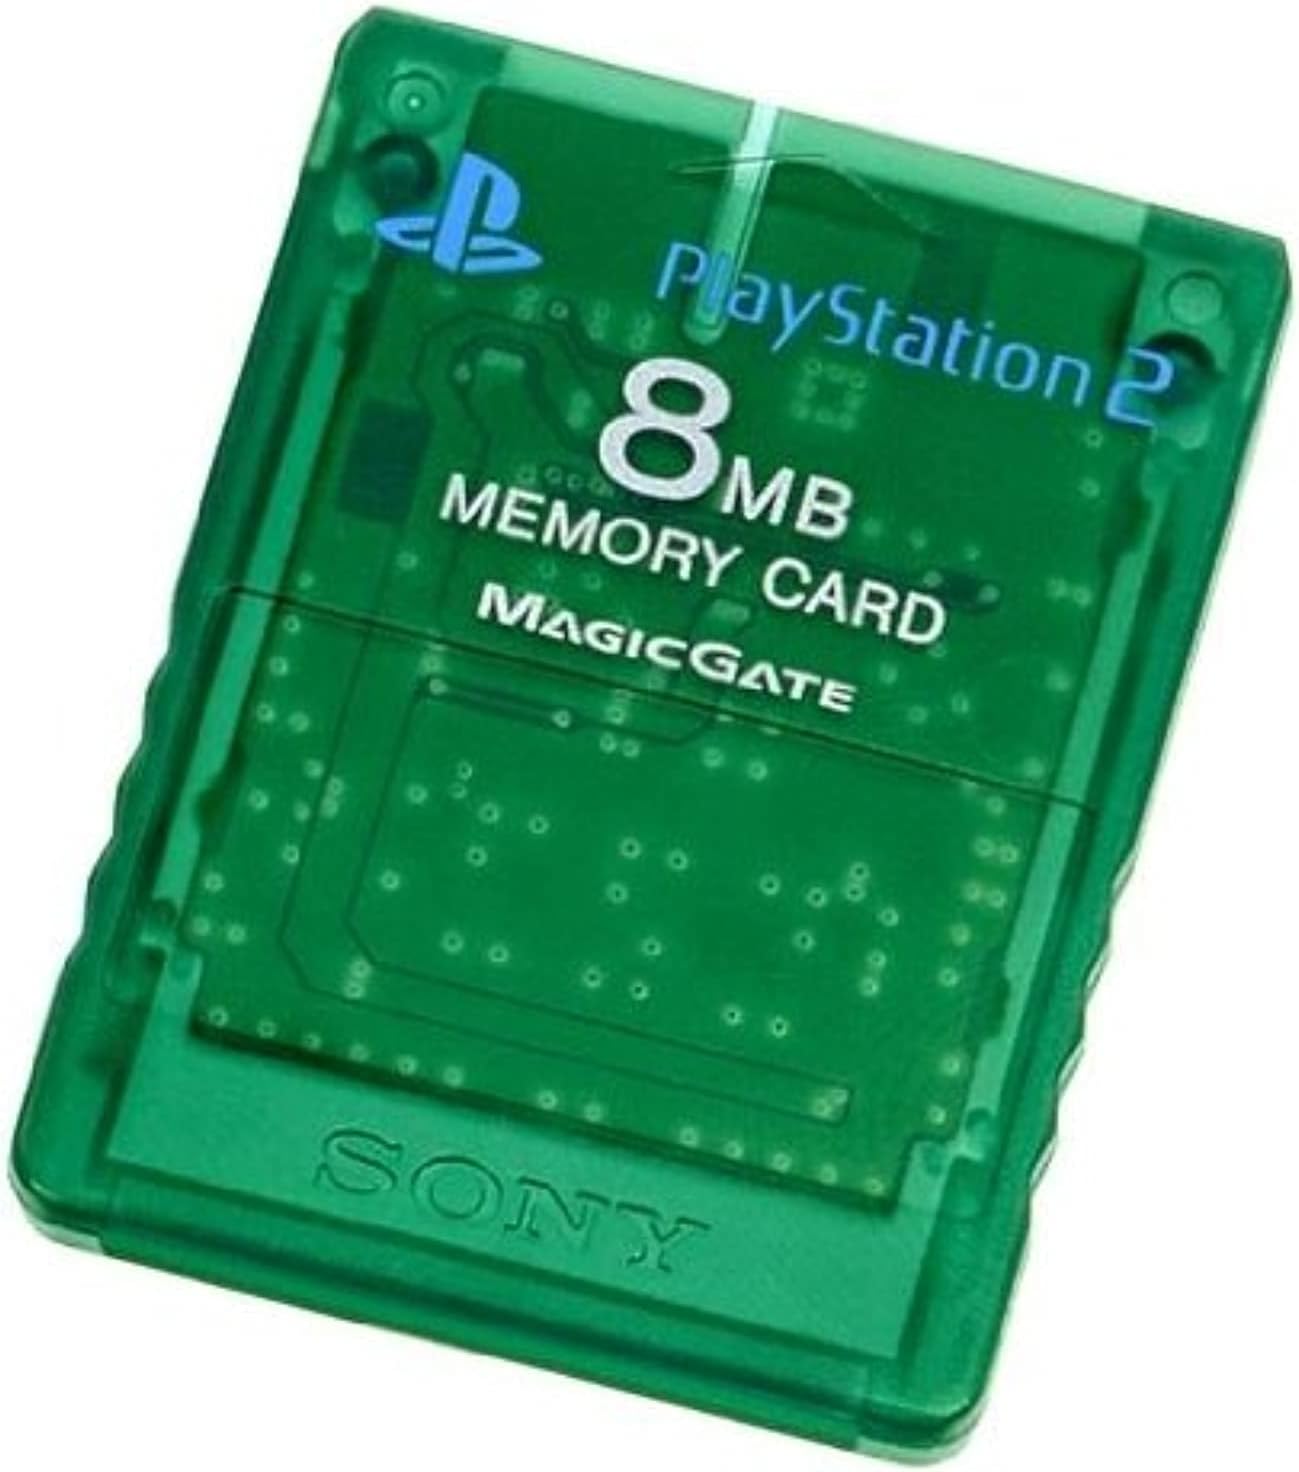 Sony PlayStation 2 PS2 Memory Card Emerald Green 8MB (SCPH-10020)